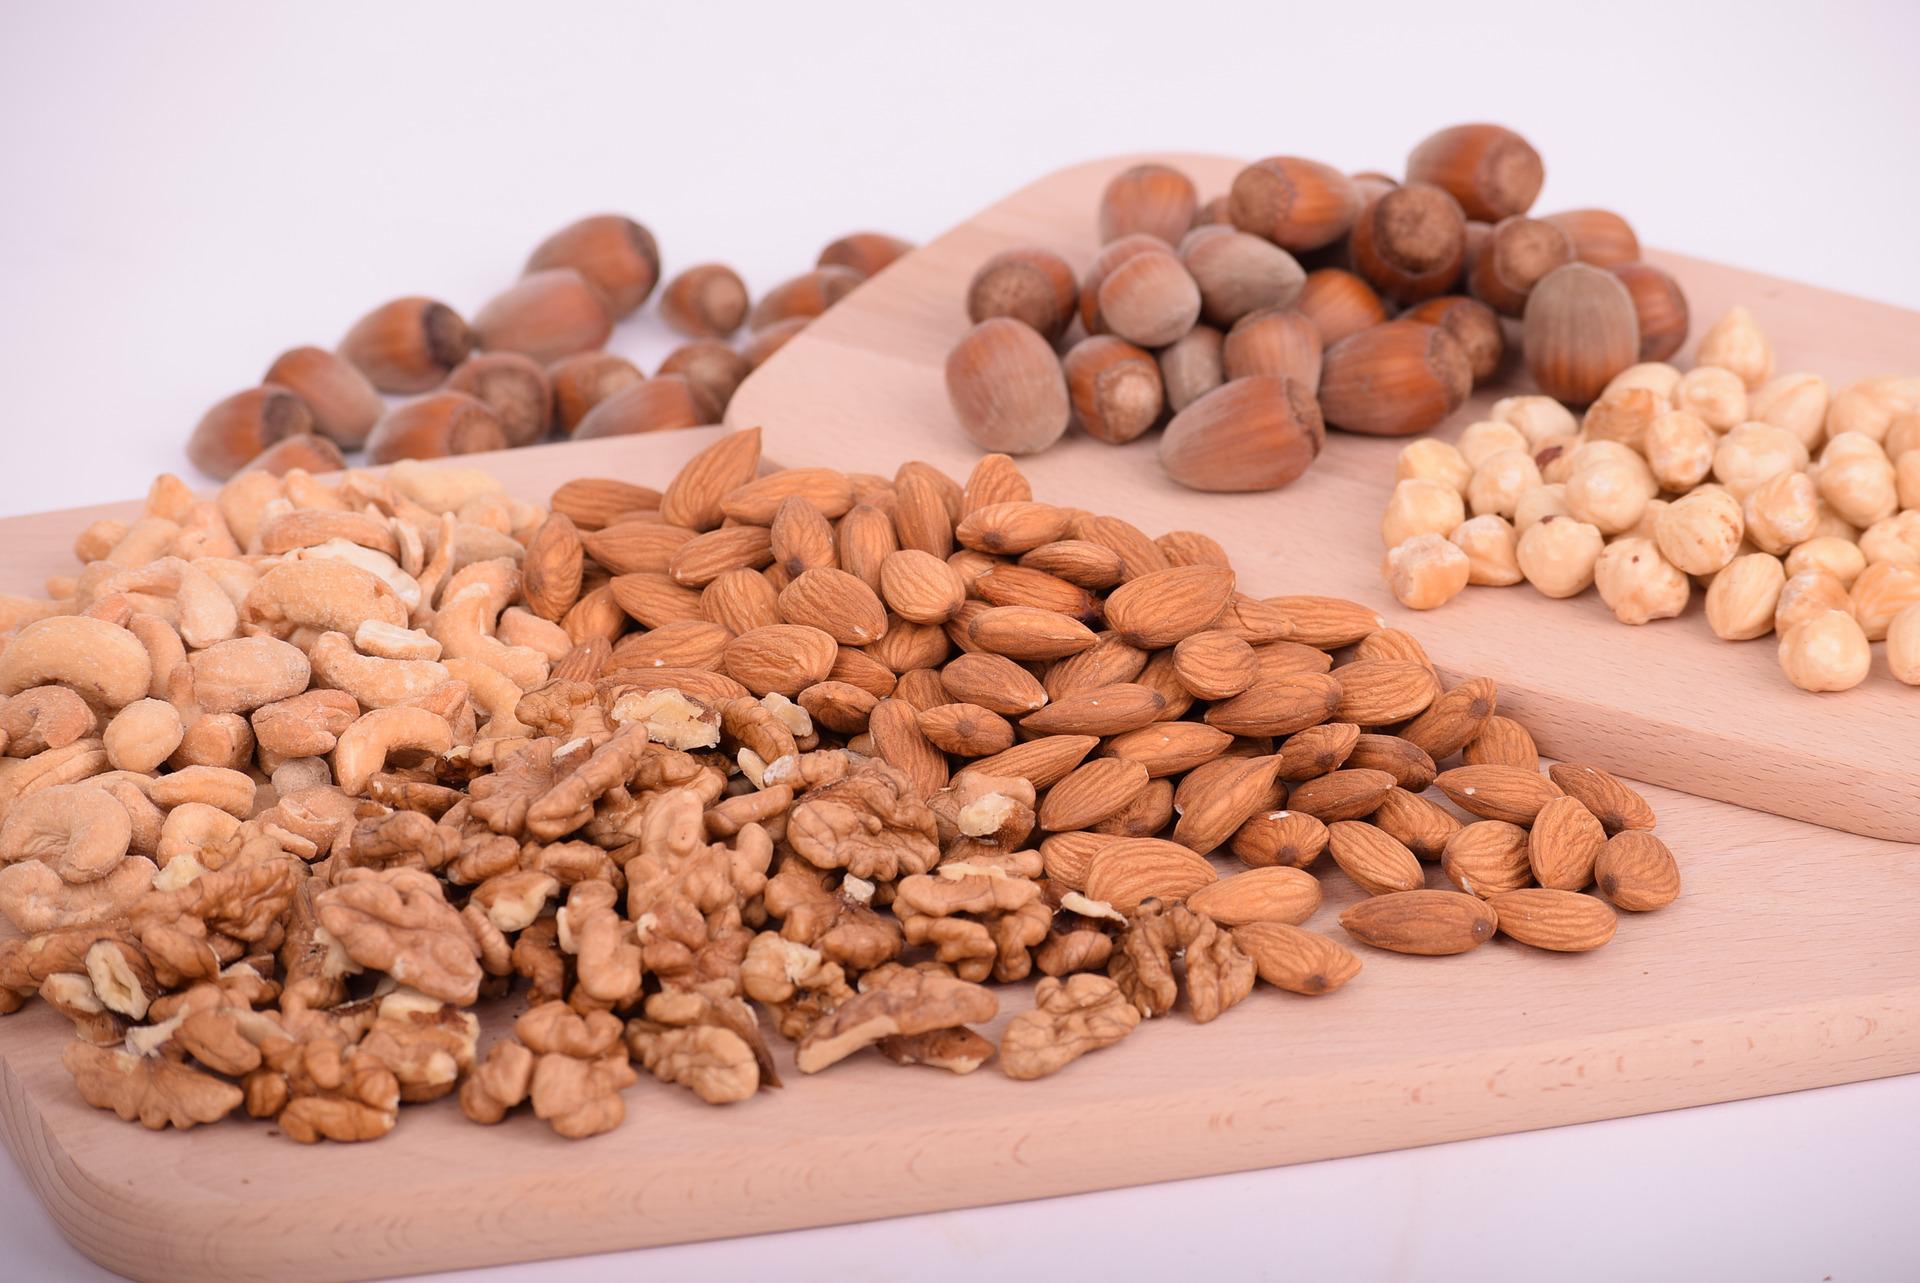 Pistachios, walnuts or almonds are a good option at any time of the day and also at night.  They have few calories and contribute to a restful sleep, although they cannot be abused or they will make you thirsty at night.